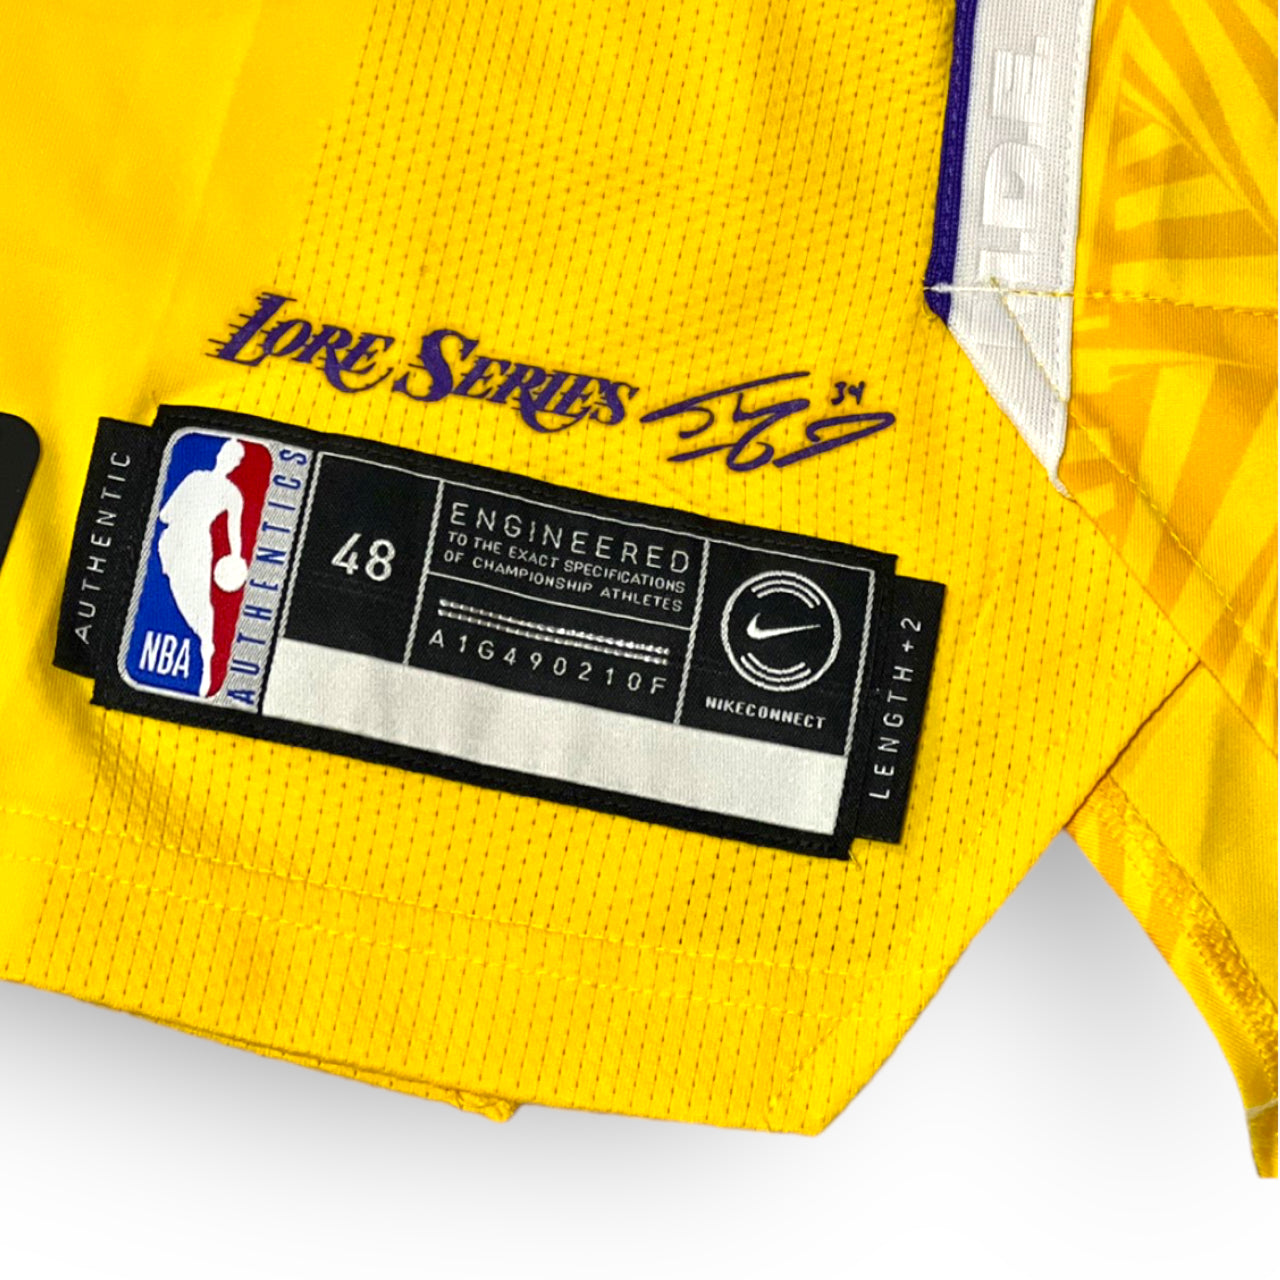 LeBron James Los Angeles Lakers 2019-2020 City Edition Nike Authentic Jersey - Yellow (with "Wish Patch") #23 - Hoop Jersey Store